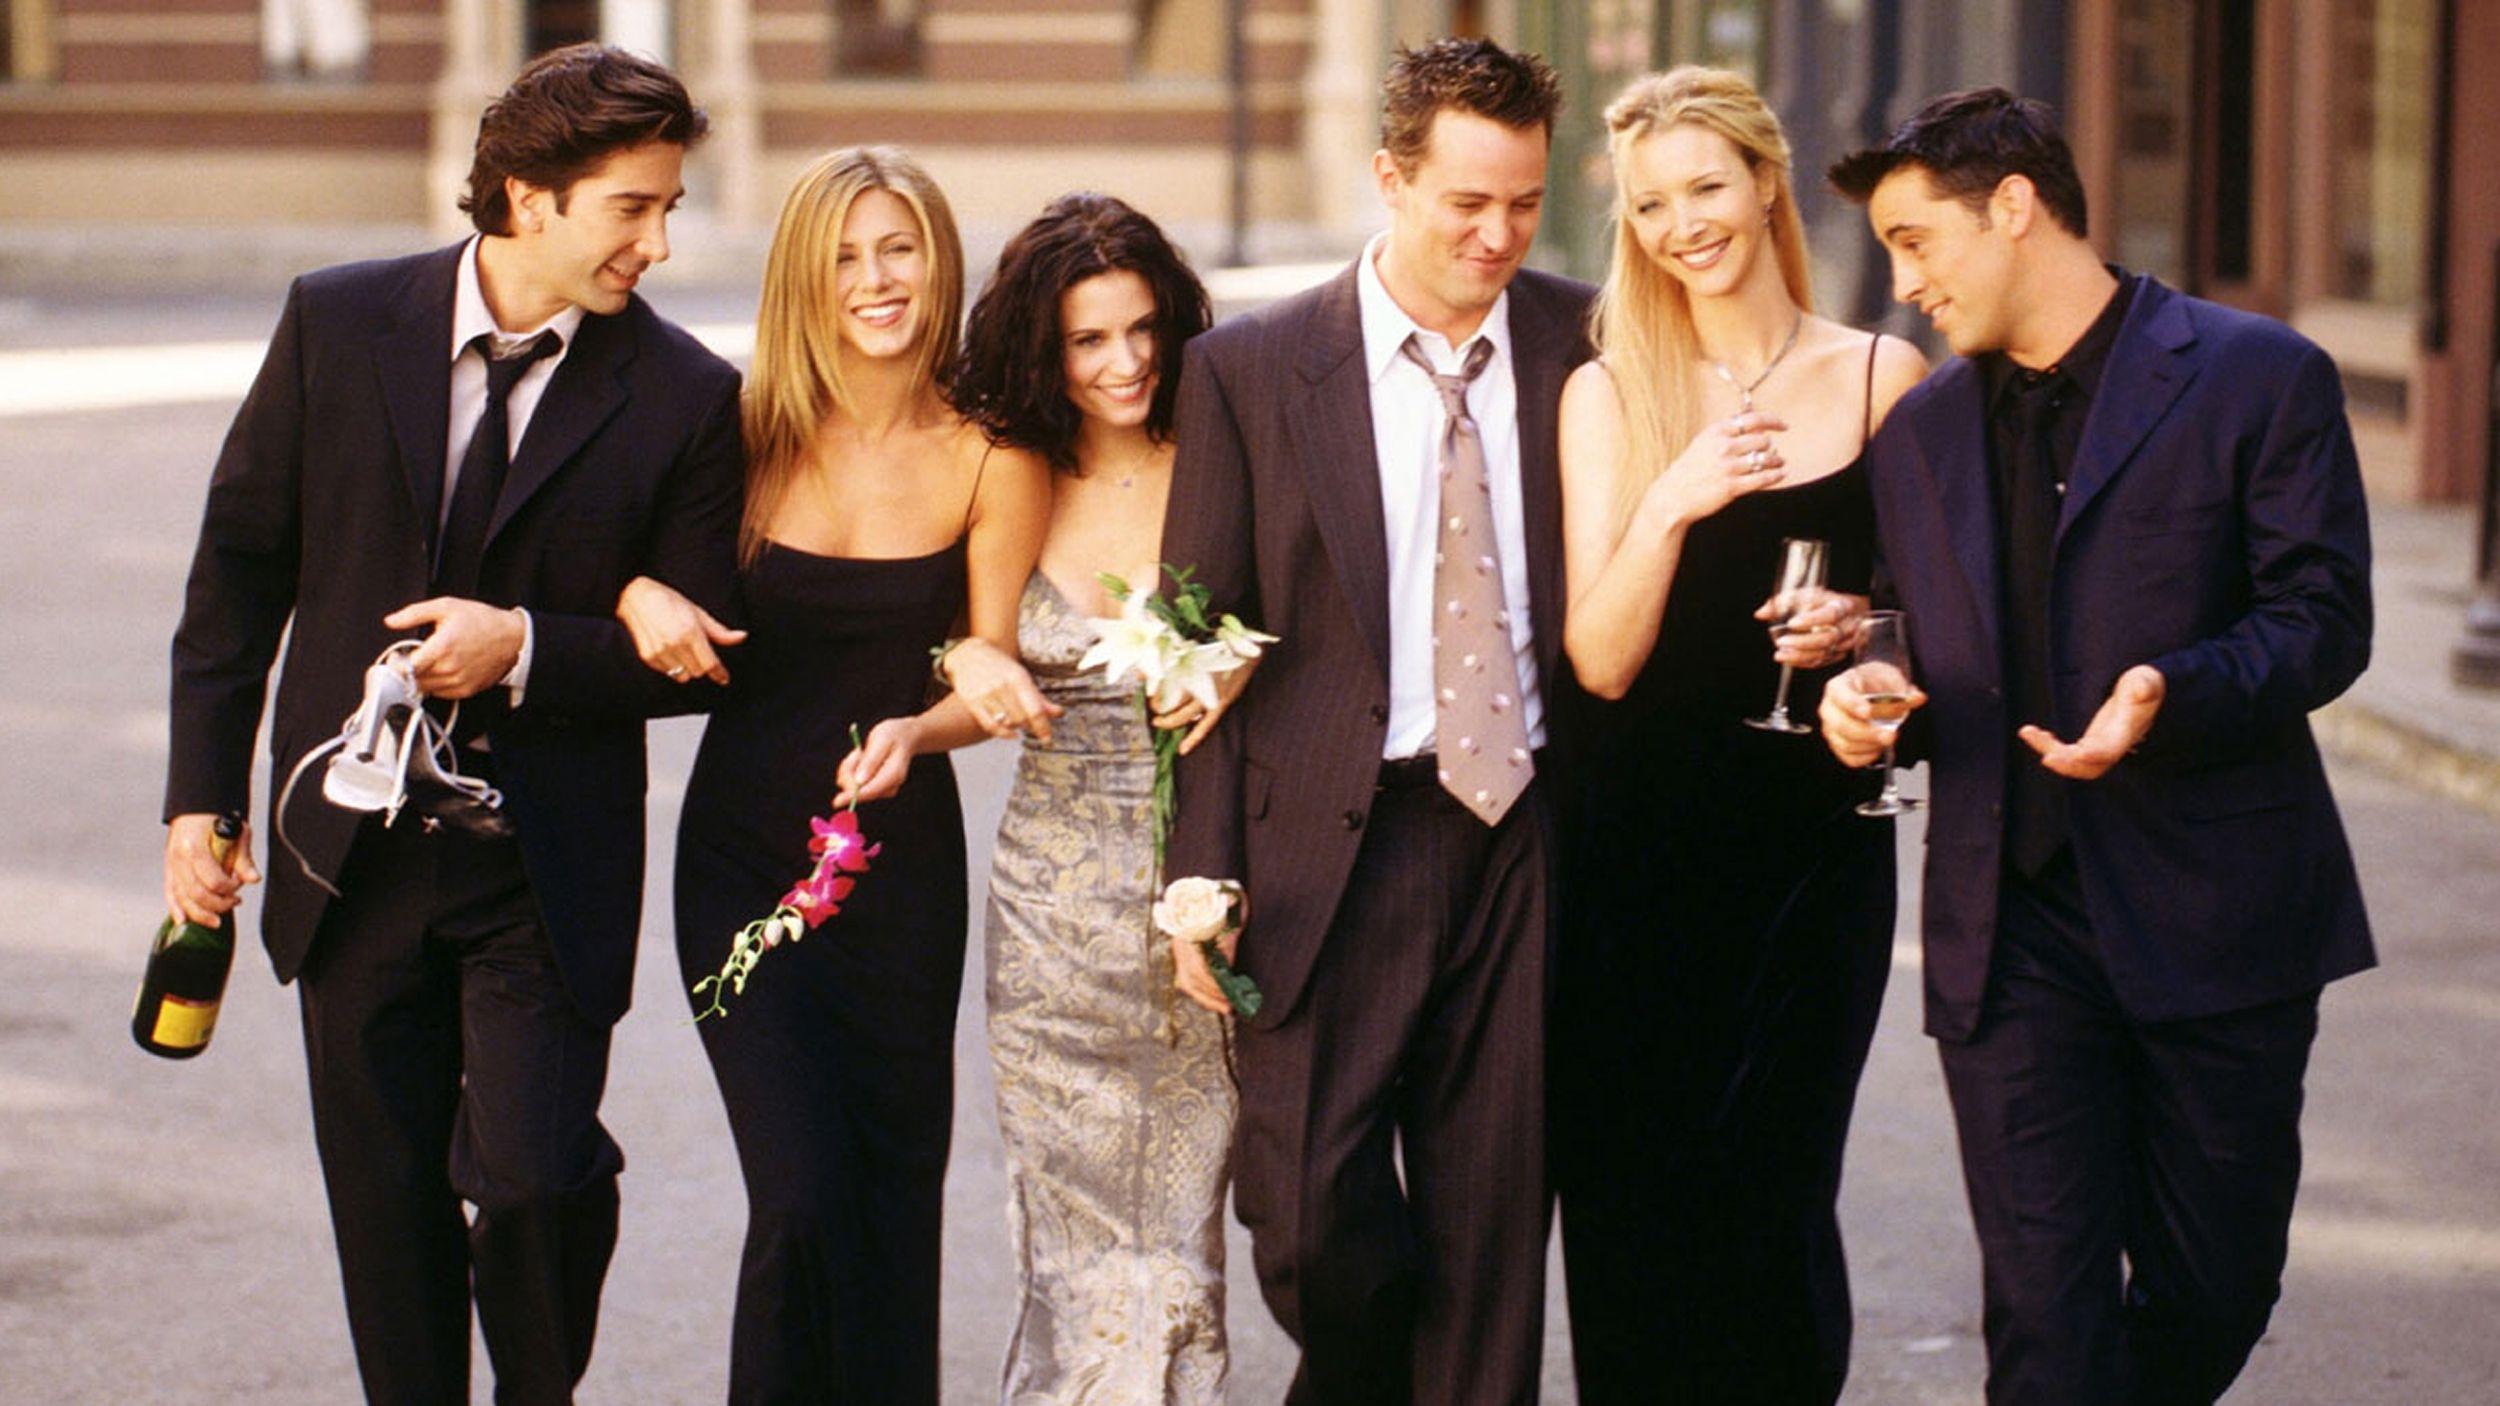 Friends Wallpaper High Resolution and Quality Download